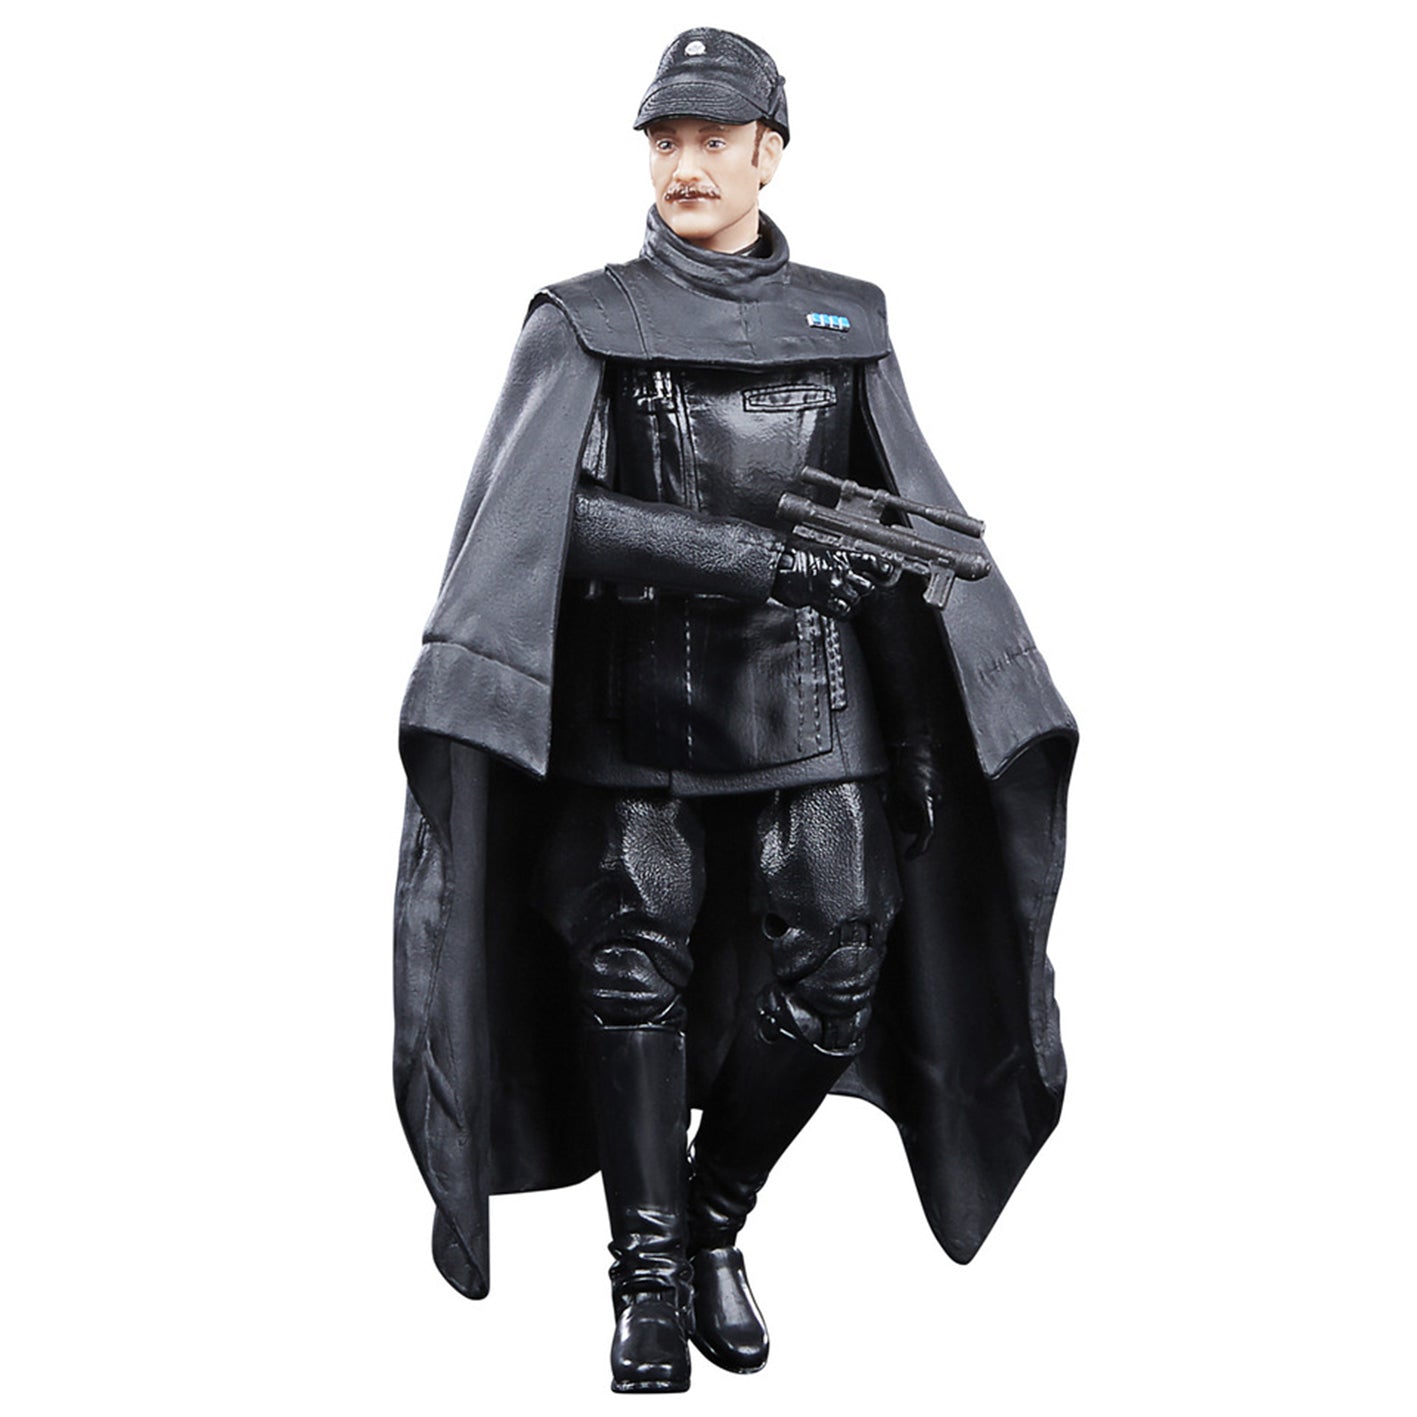 Imperial Officer Walmart Exclusive, Star Wars The Black Series